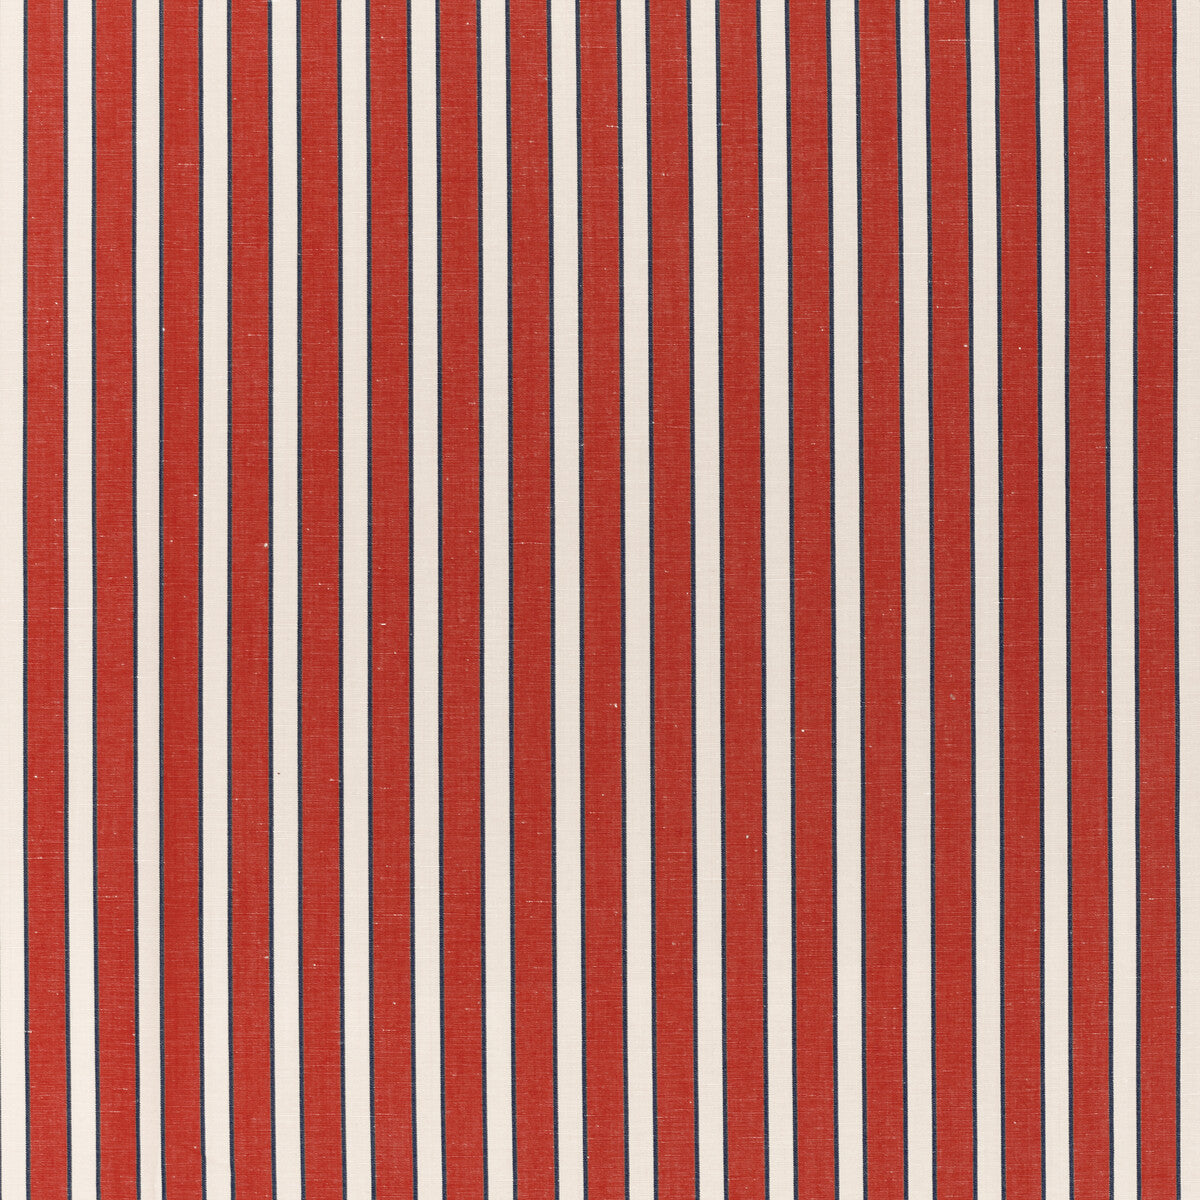 Rouen Stripe fabric in red color - pattern 8022117.195.0 - by Brunschwig &amp; Fils in the Normant Checks And Stripes II collection